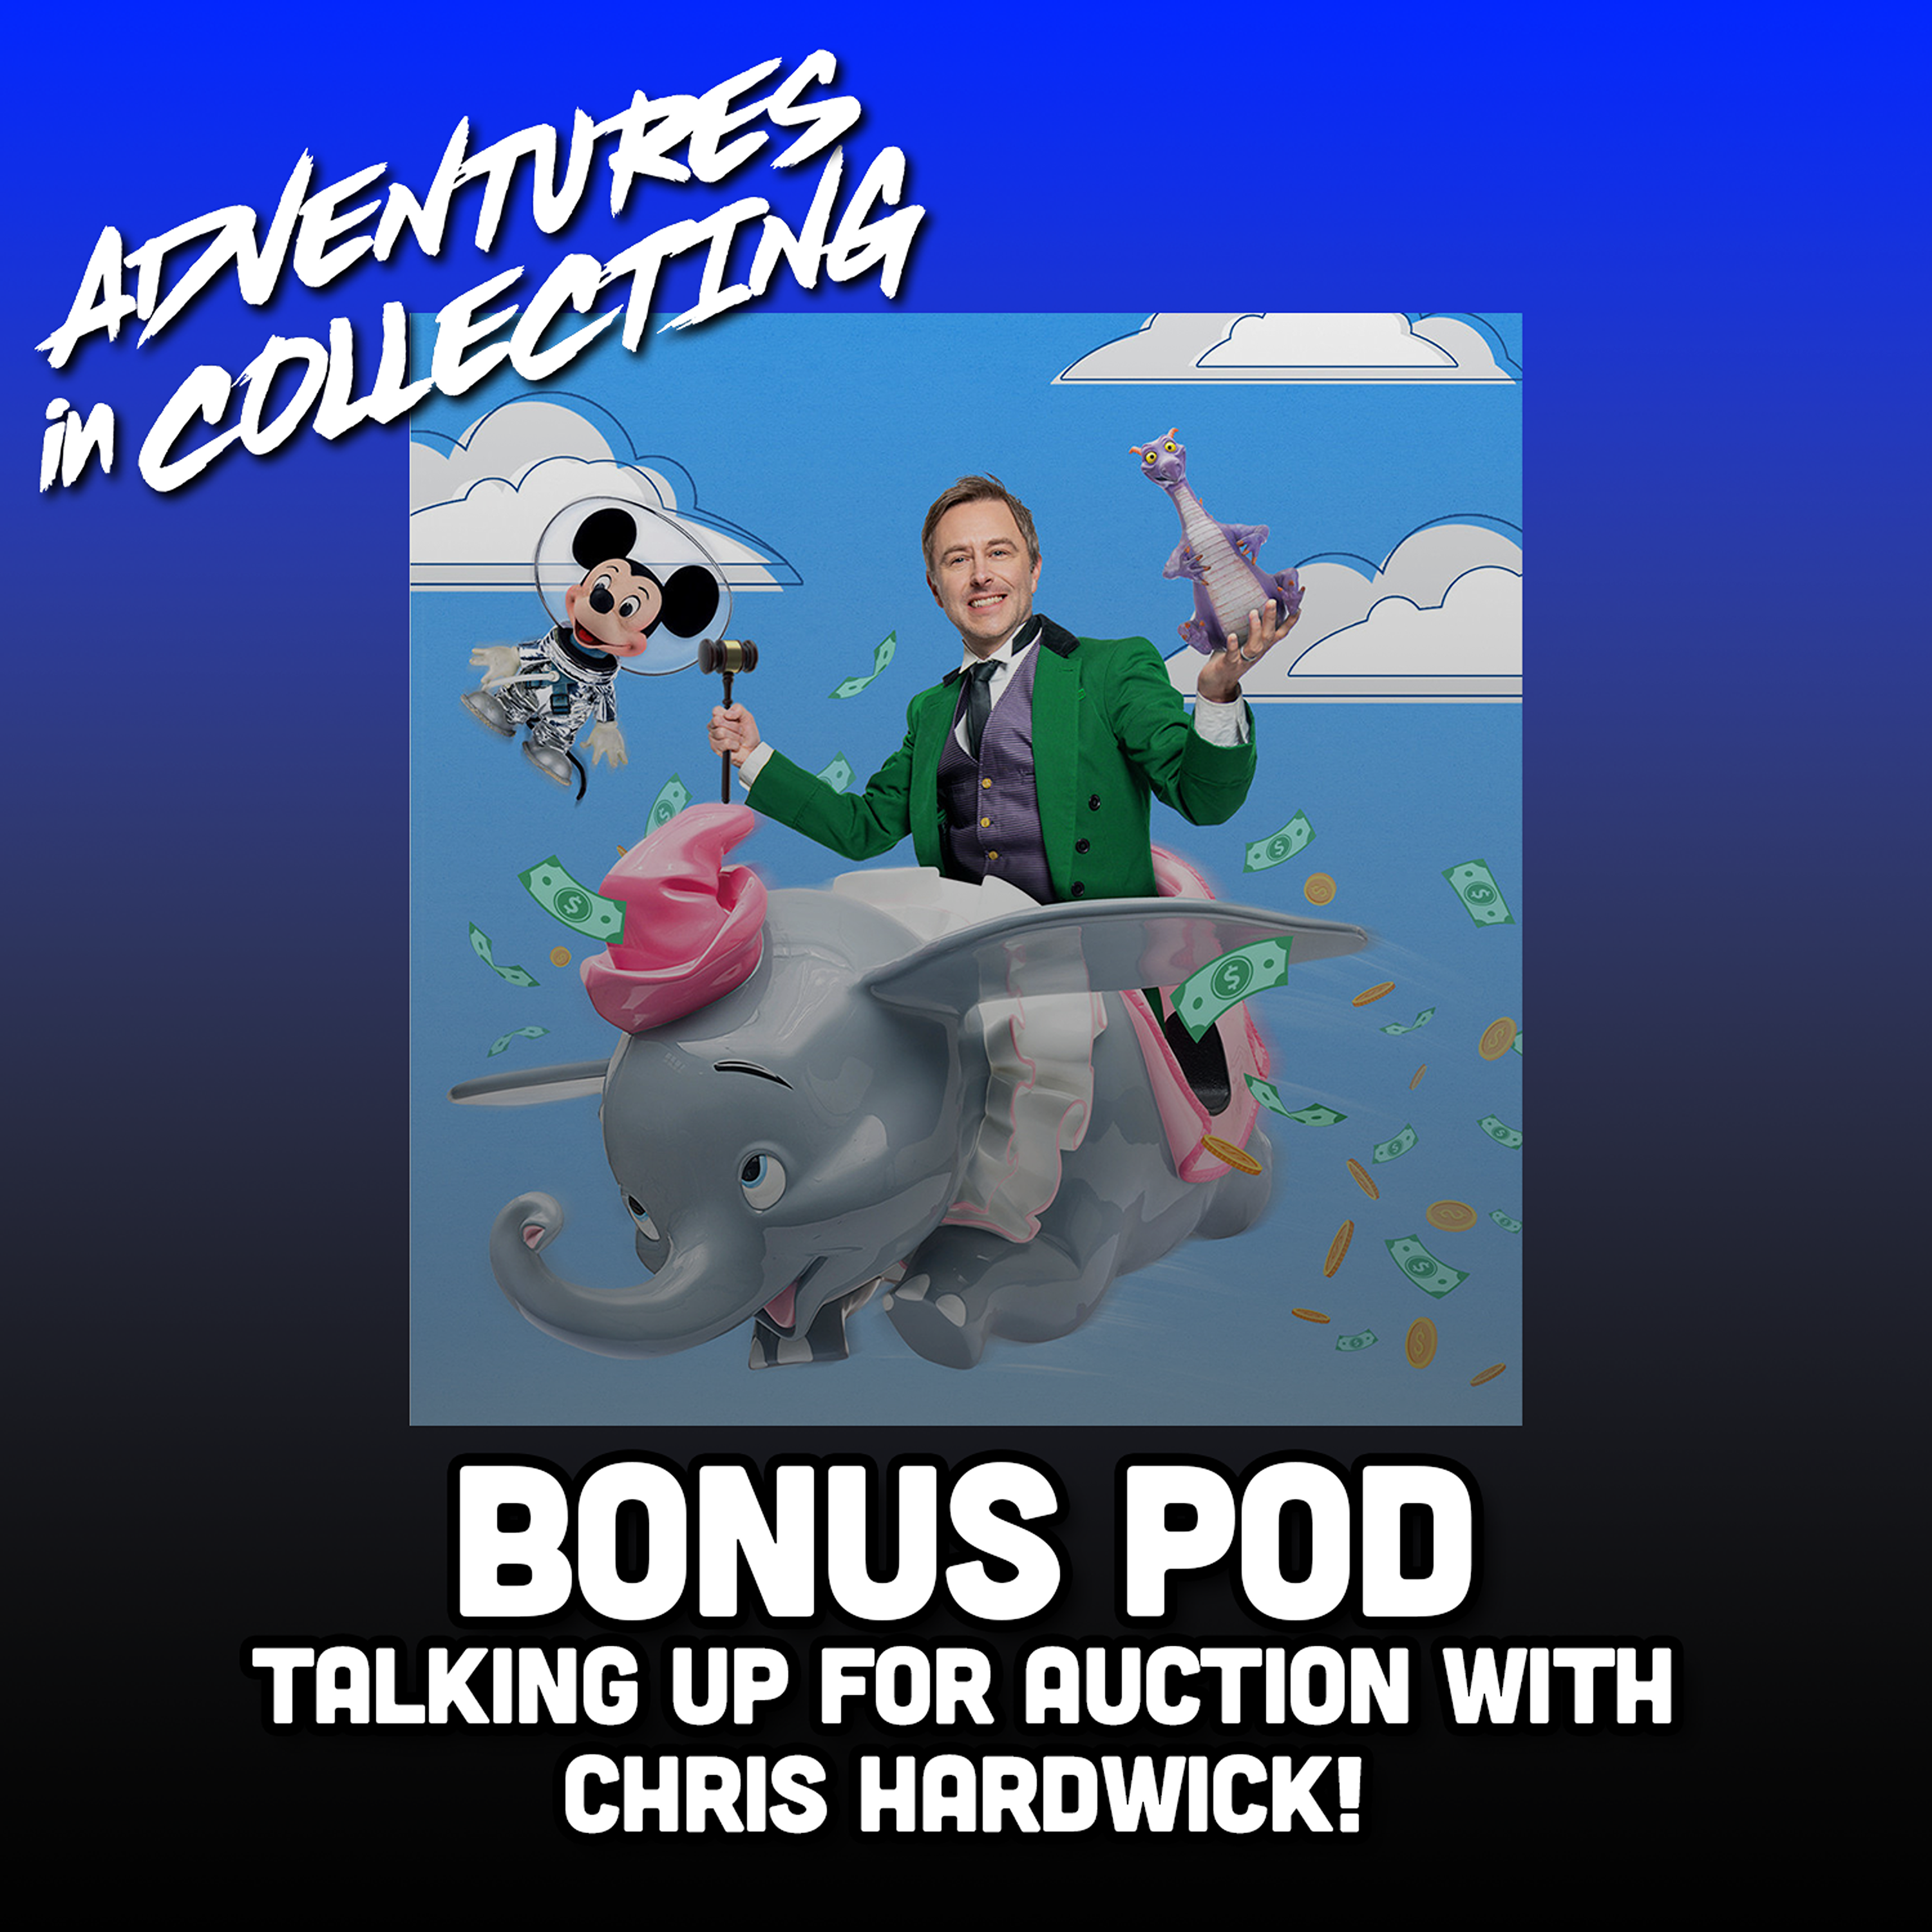 Bonus Pod: Talking Up for Auction with Chris Hardwick – Adventures in Collecting